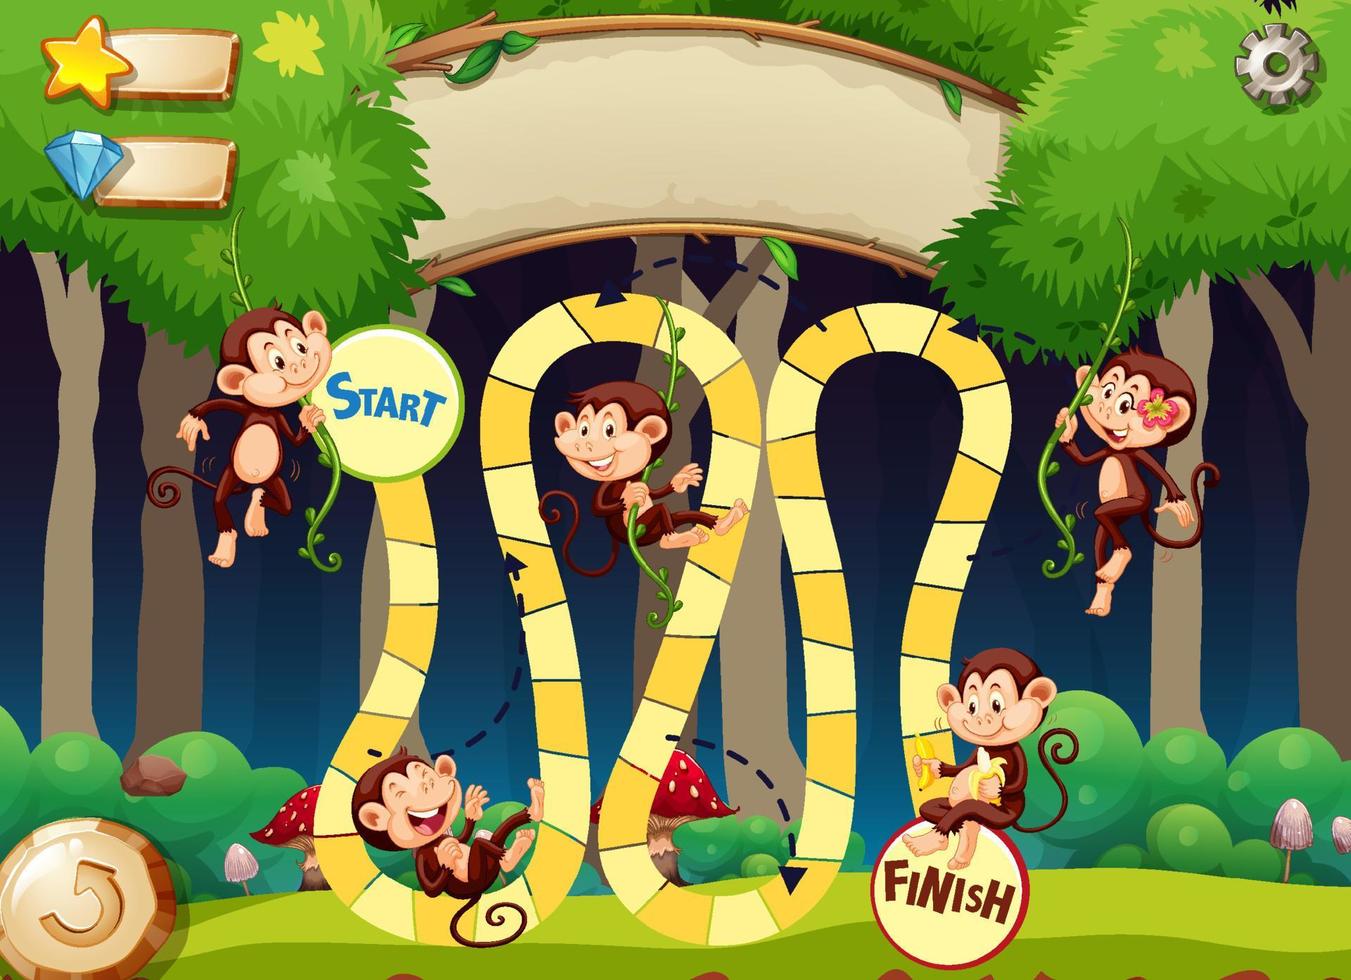 Game design with monkeys in forest background vector